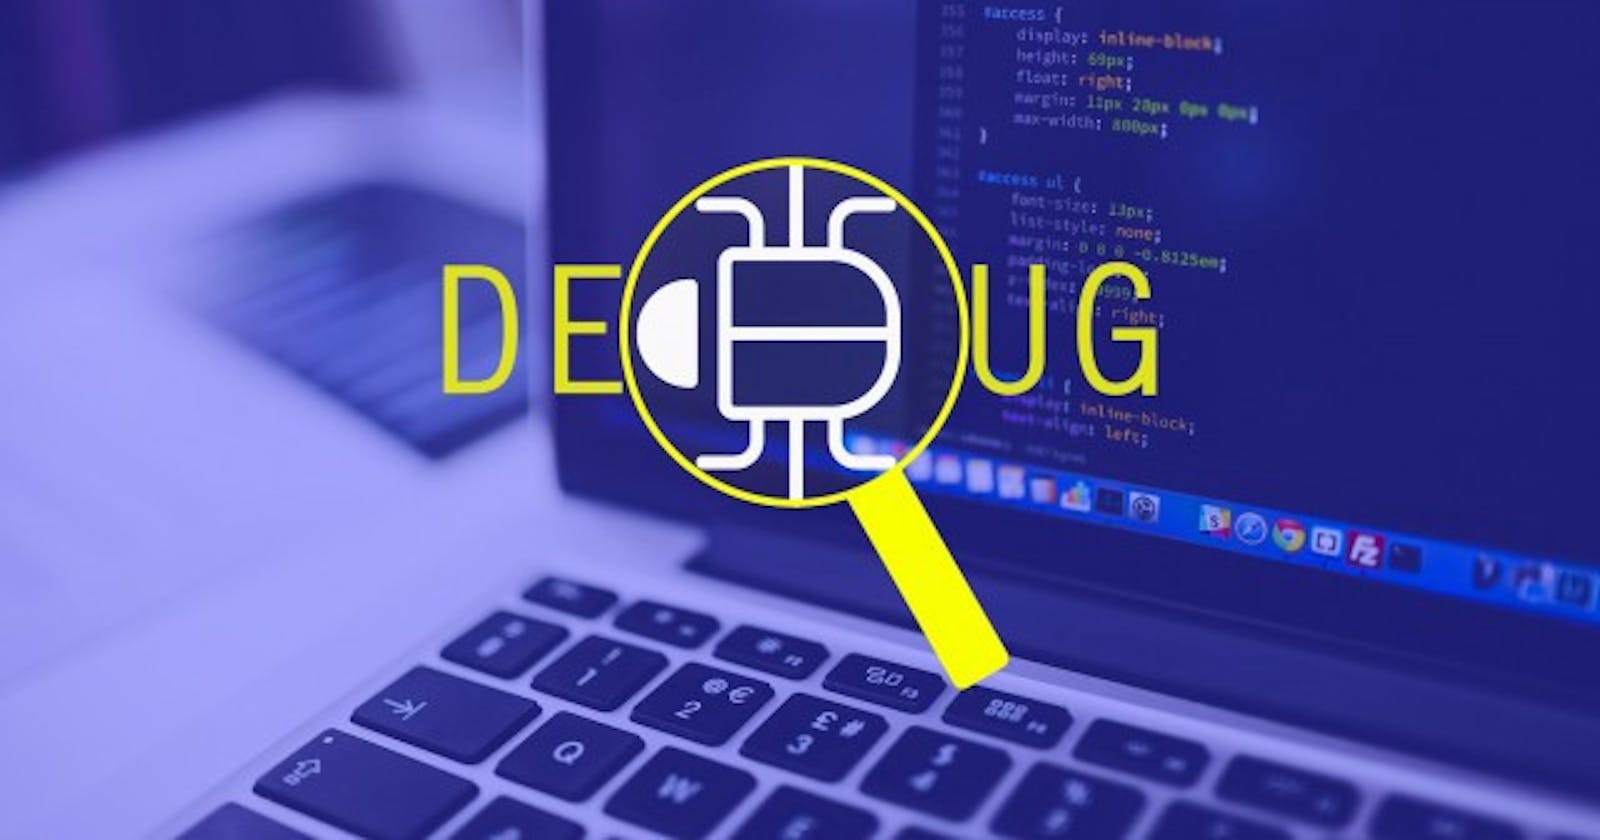 Debugging tools: A developer's first friend